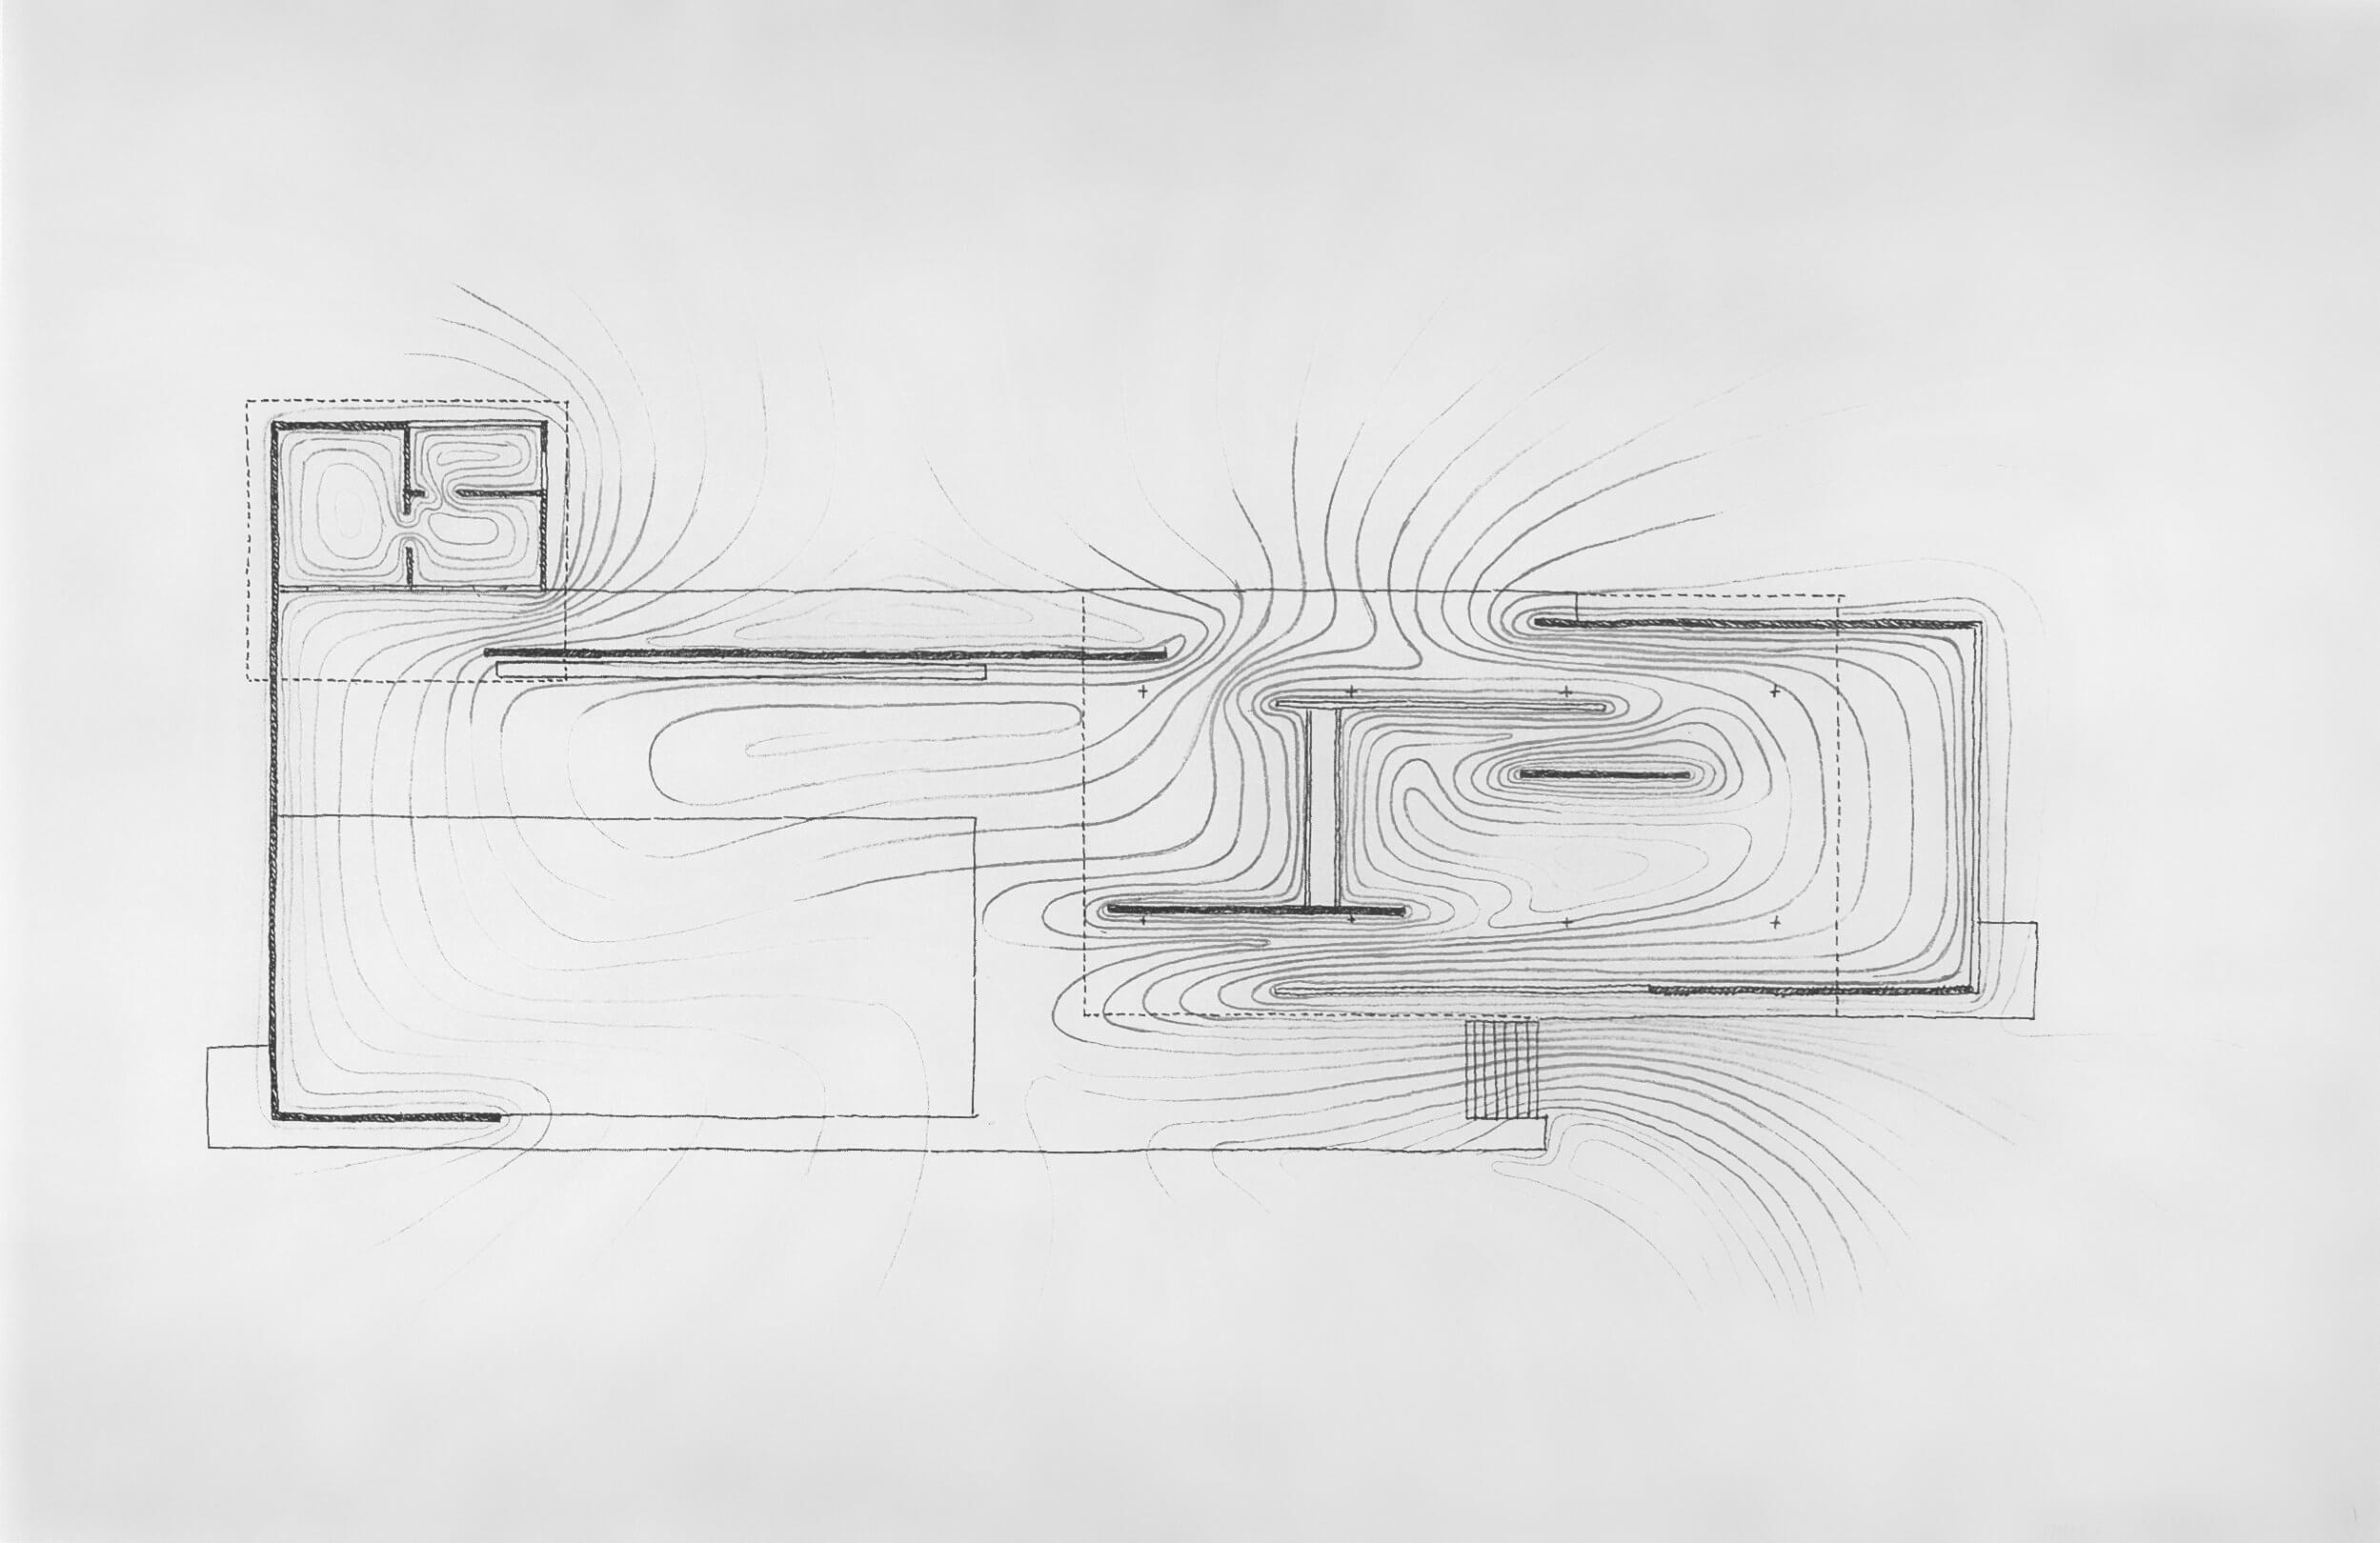 ‘Density & Flowing Of Space’ - Paul Rudolph’s graphic analysis of Mies’s Barcelona Pavilion.